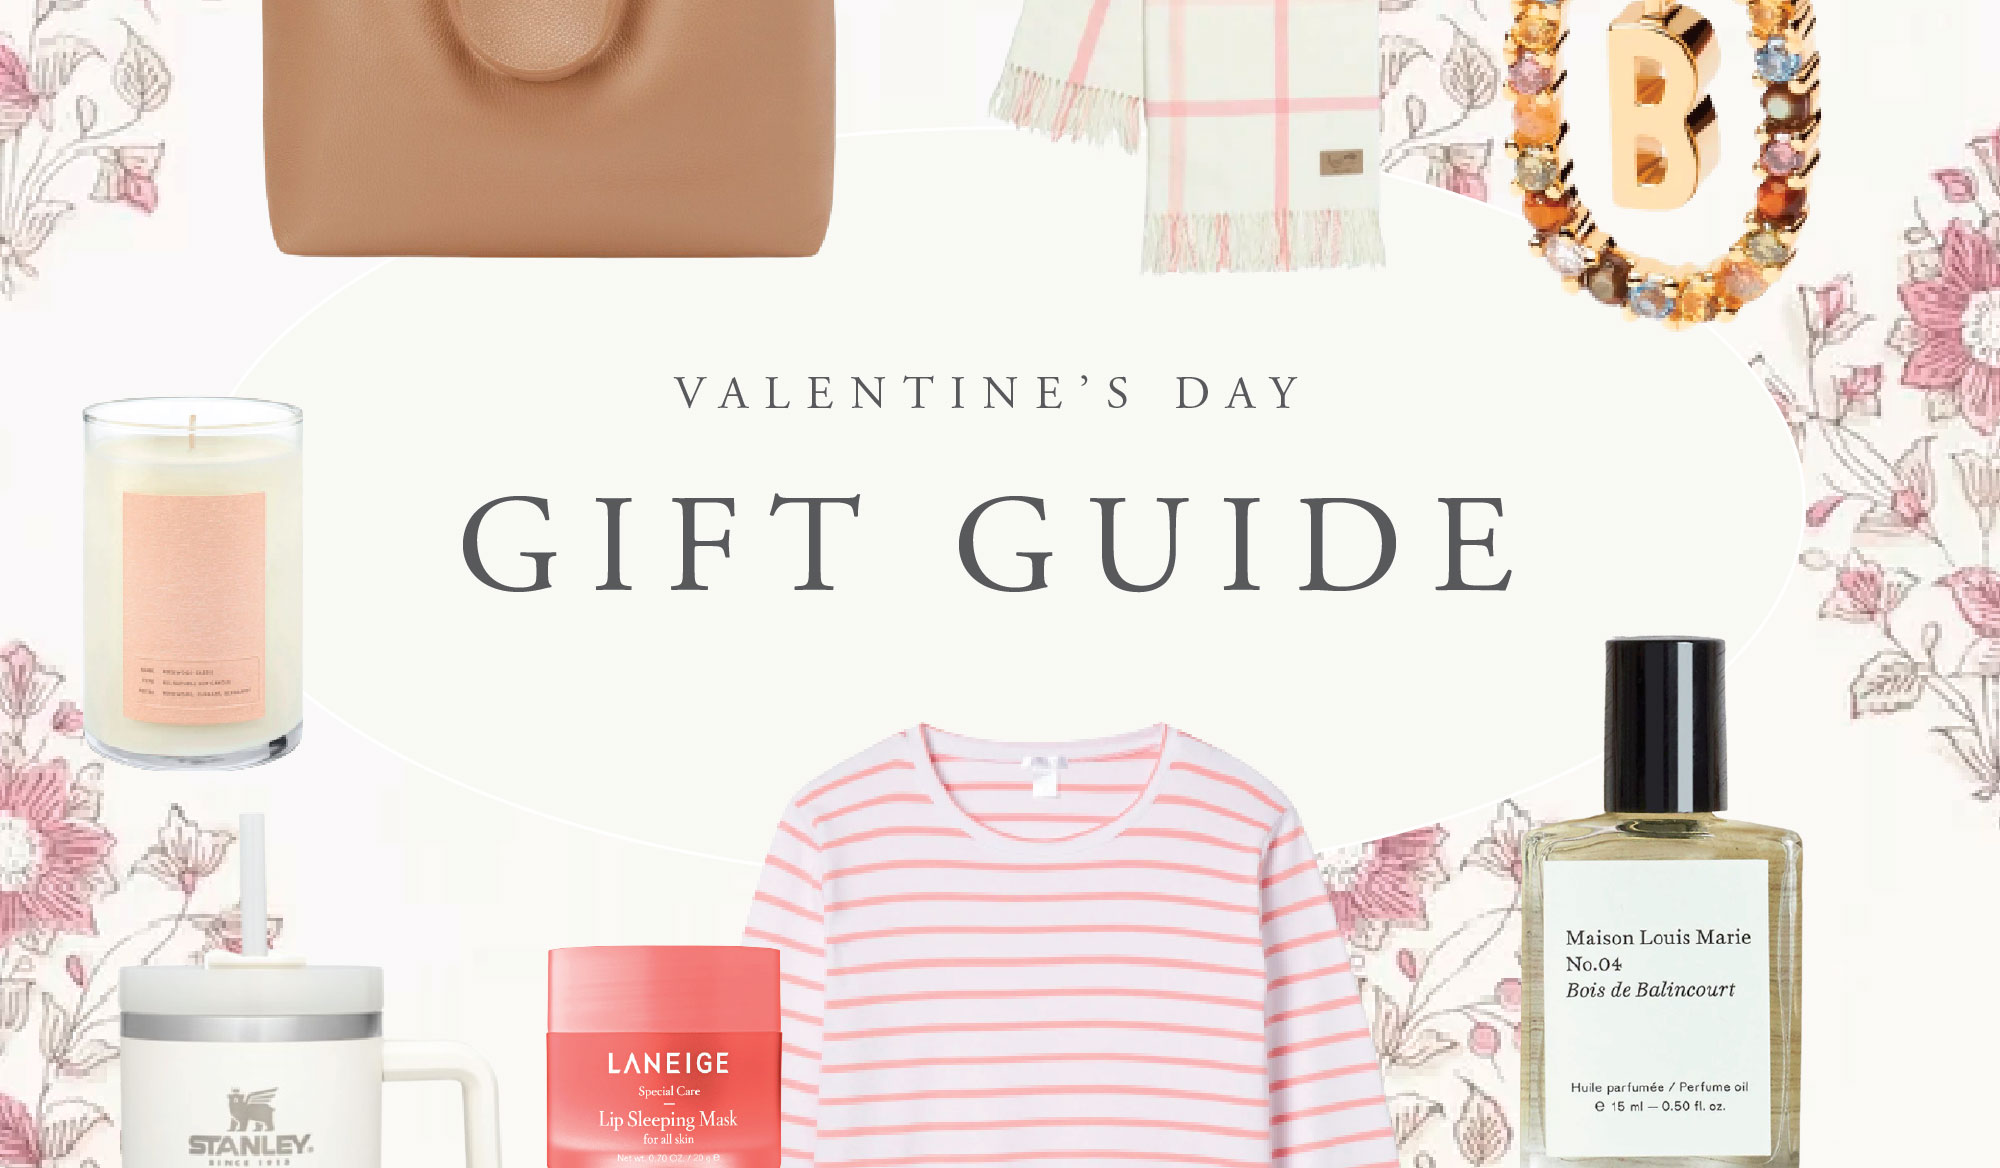 Valentine's day gift ideas: Accessories for him and her from Louis